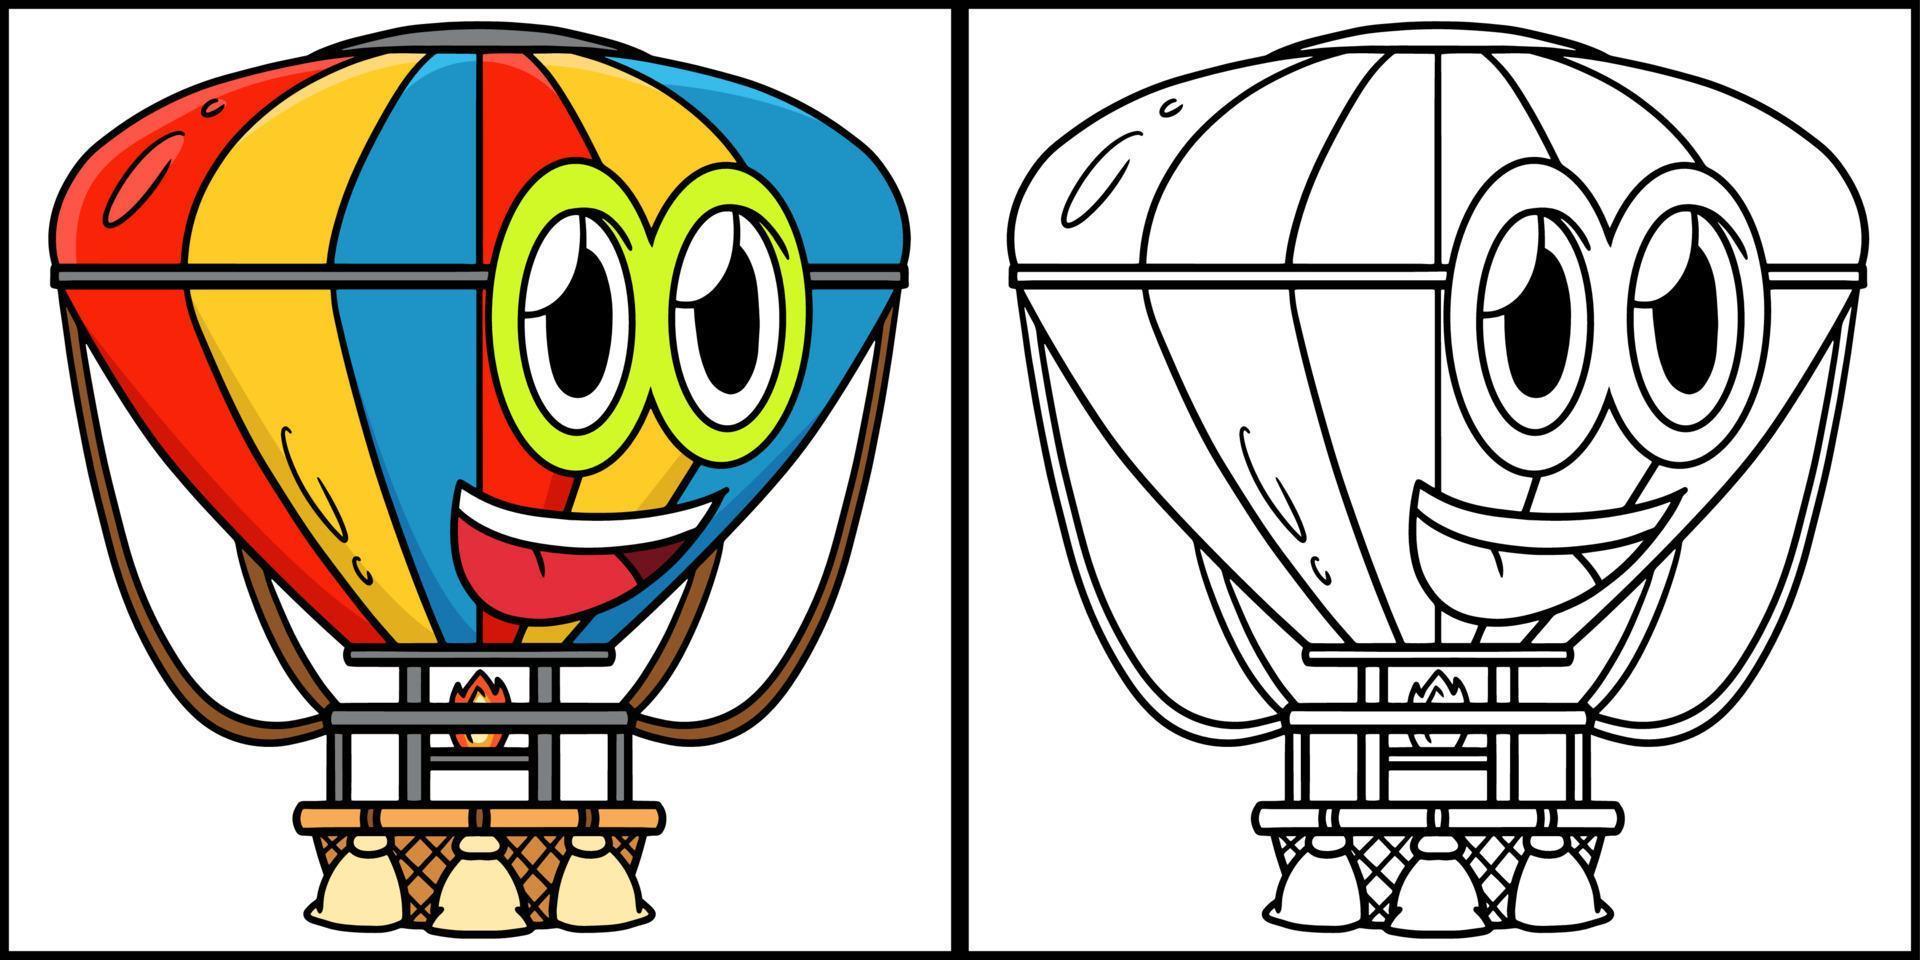 Hot Air Balloon with Face Vehicle Coloring Page vector